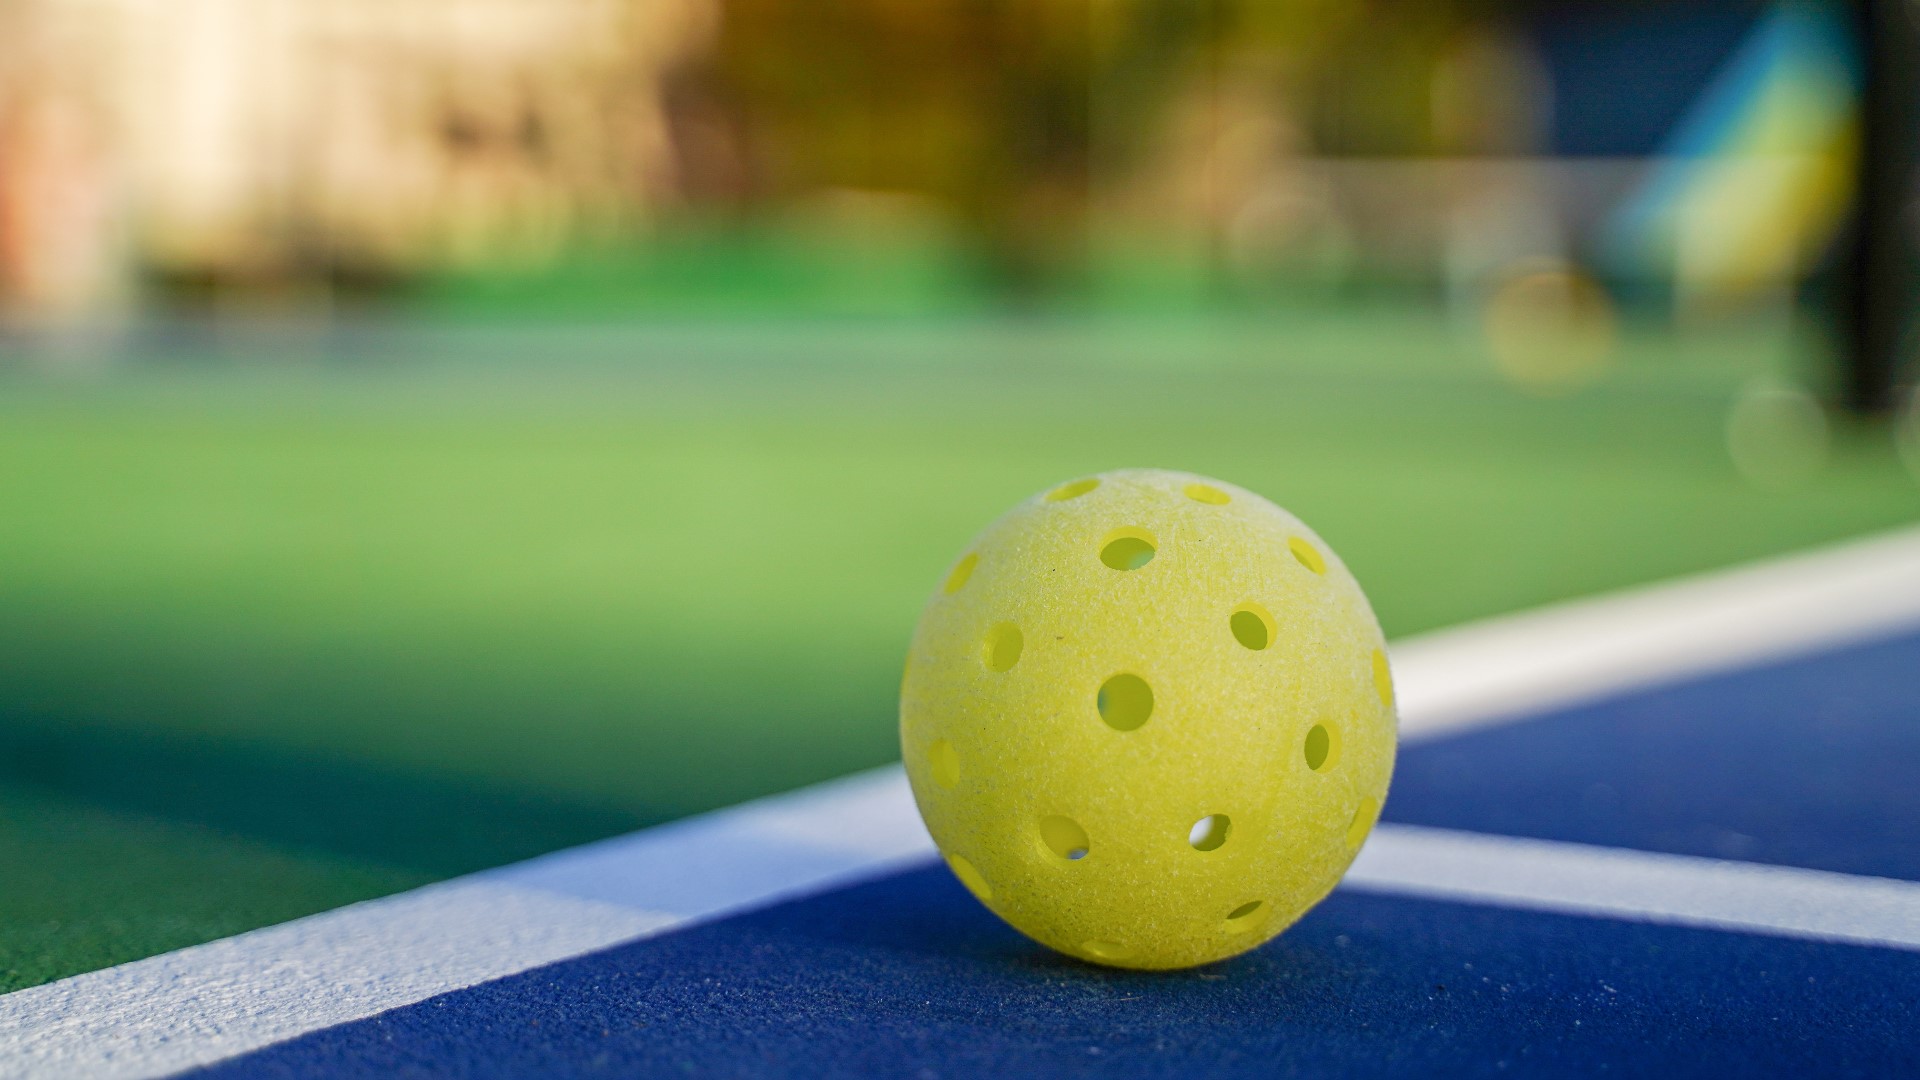 Billed as the "Des Moines area's only 100% dedicated indoor pickleball venue", Dinks will span 70,000 square feet and feature 13 professional pickleball courts.